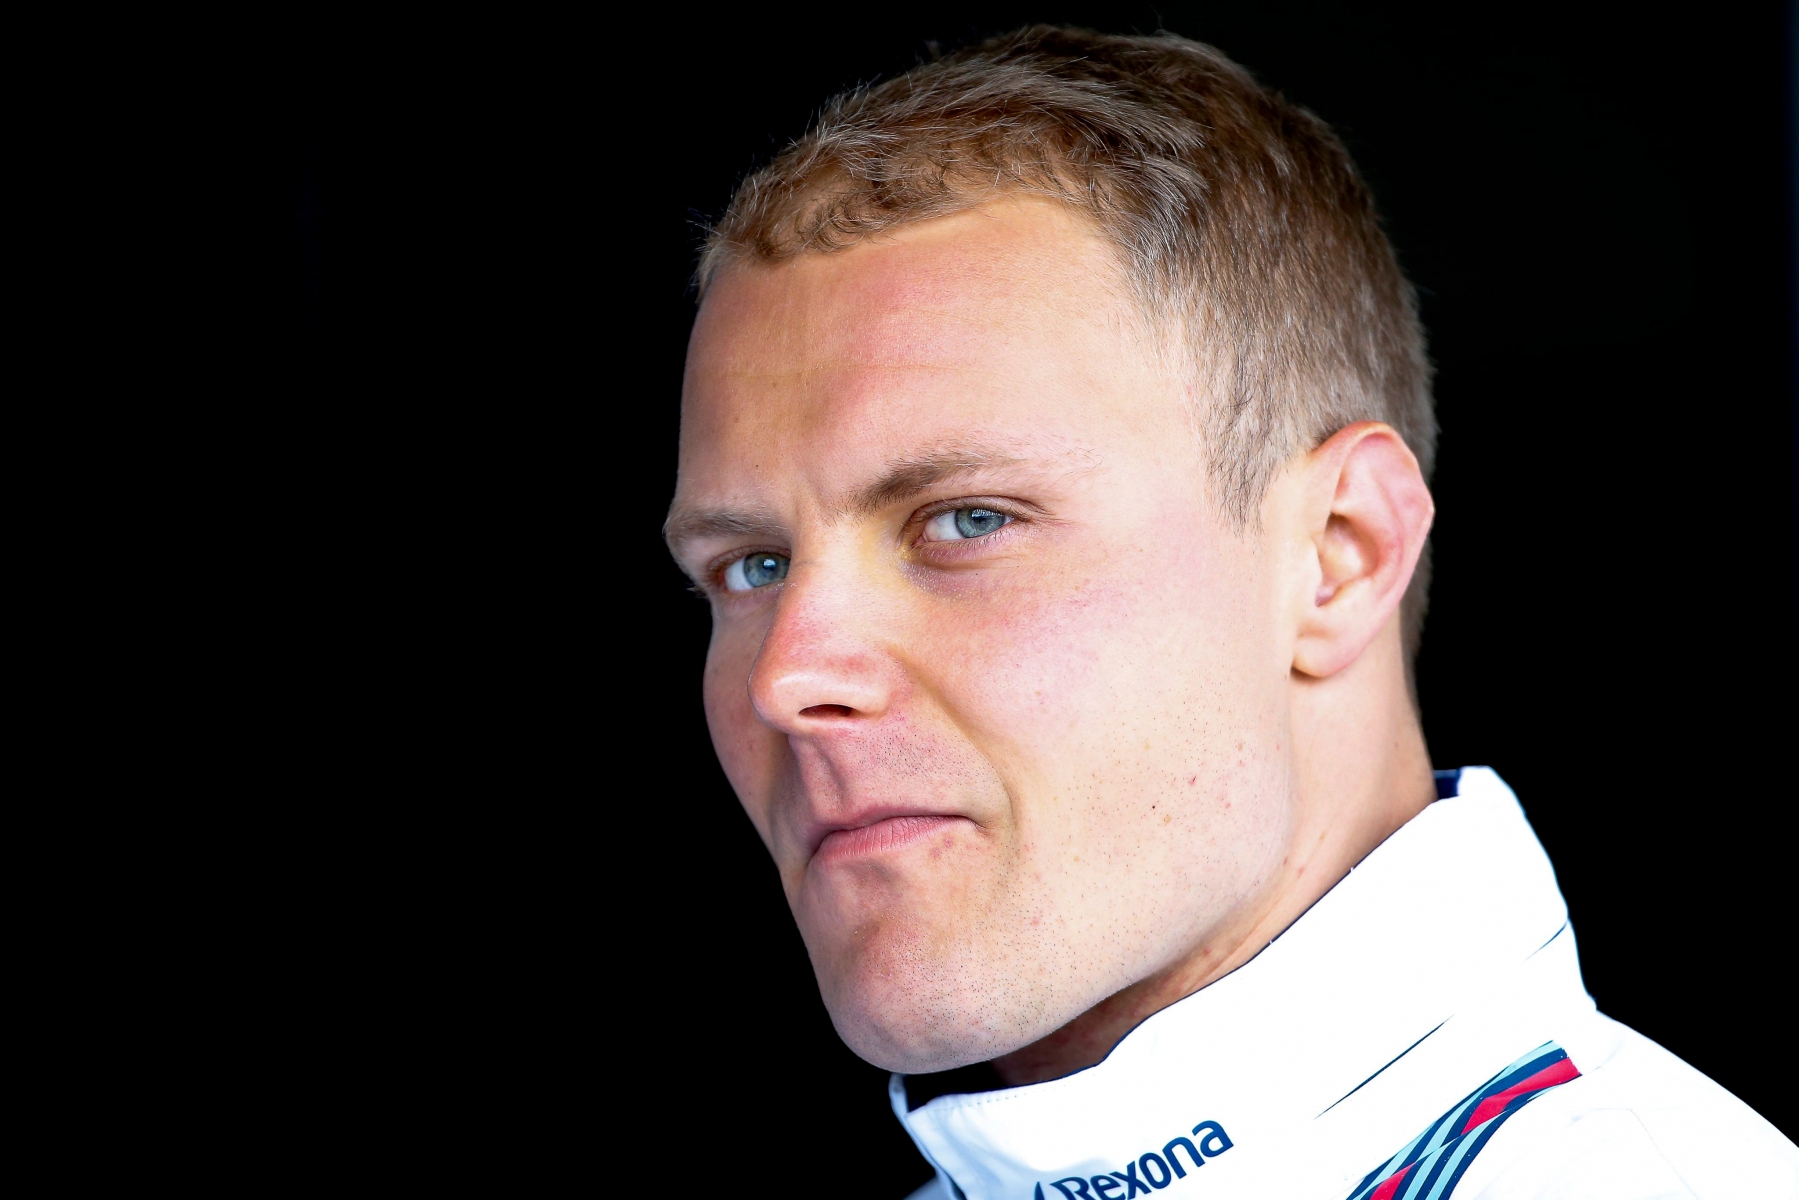 epa05217694 Finnish Formula One driver Valtteri Bottas of Williams inside his team's garage during the first practice session of the Australian Formula One Grand Prix at the Albert Park circuit in Melbourne, Australia, 18 March 2016. The 2016 Formula One Grand Prix of Australia will take place on 20 March 2016.  EPA/DIEGO AZUBELs MOTORSPORT F1 2016 GP AUSTRALIEN